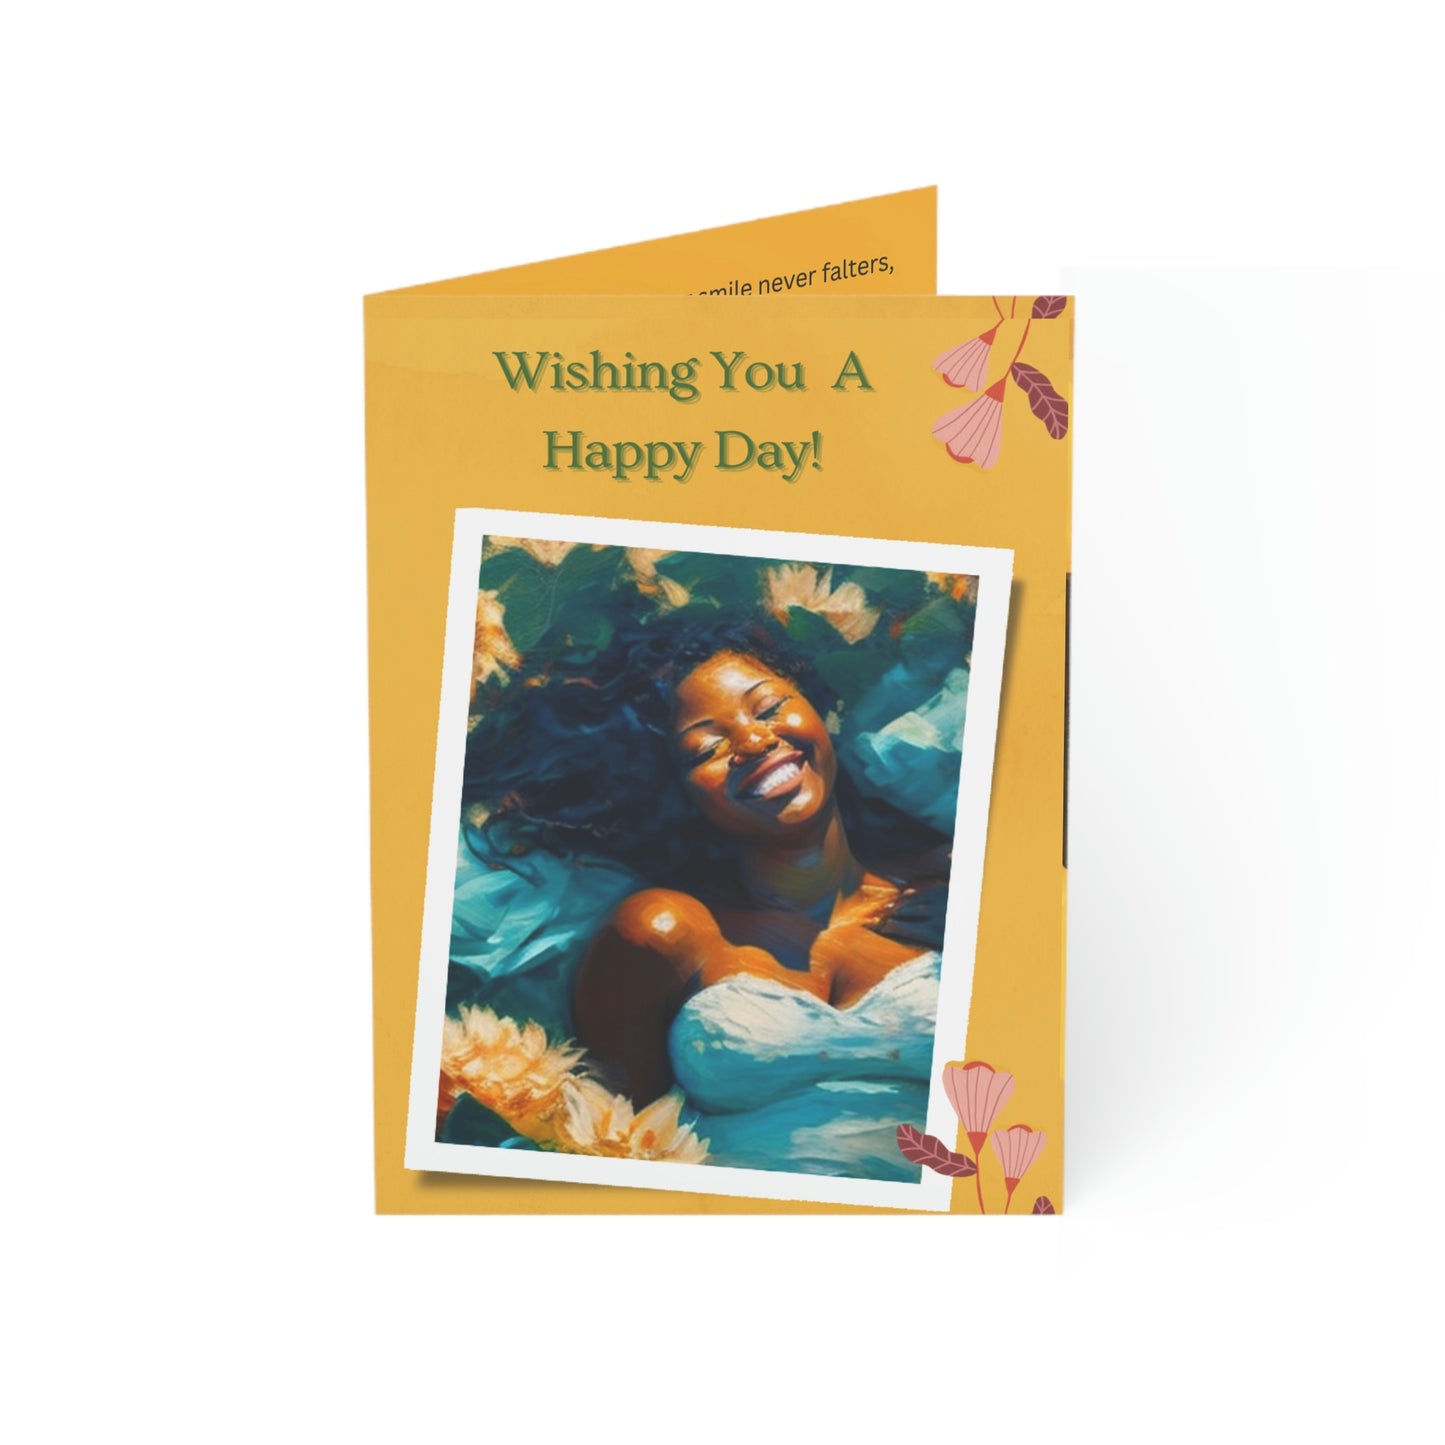 Wishing You A Happy Day - Black Art Greeting Cards (1, 10, 30, and 50pcs)